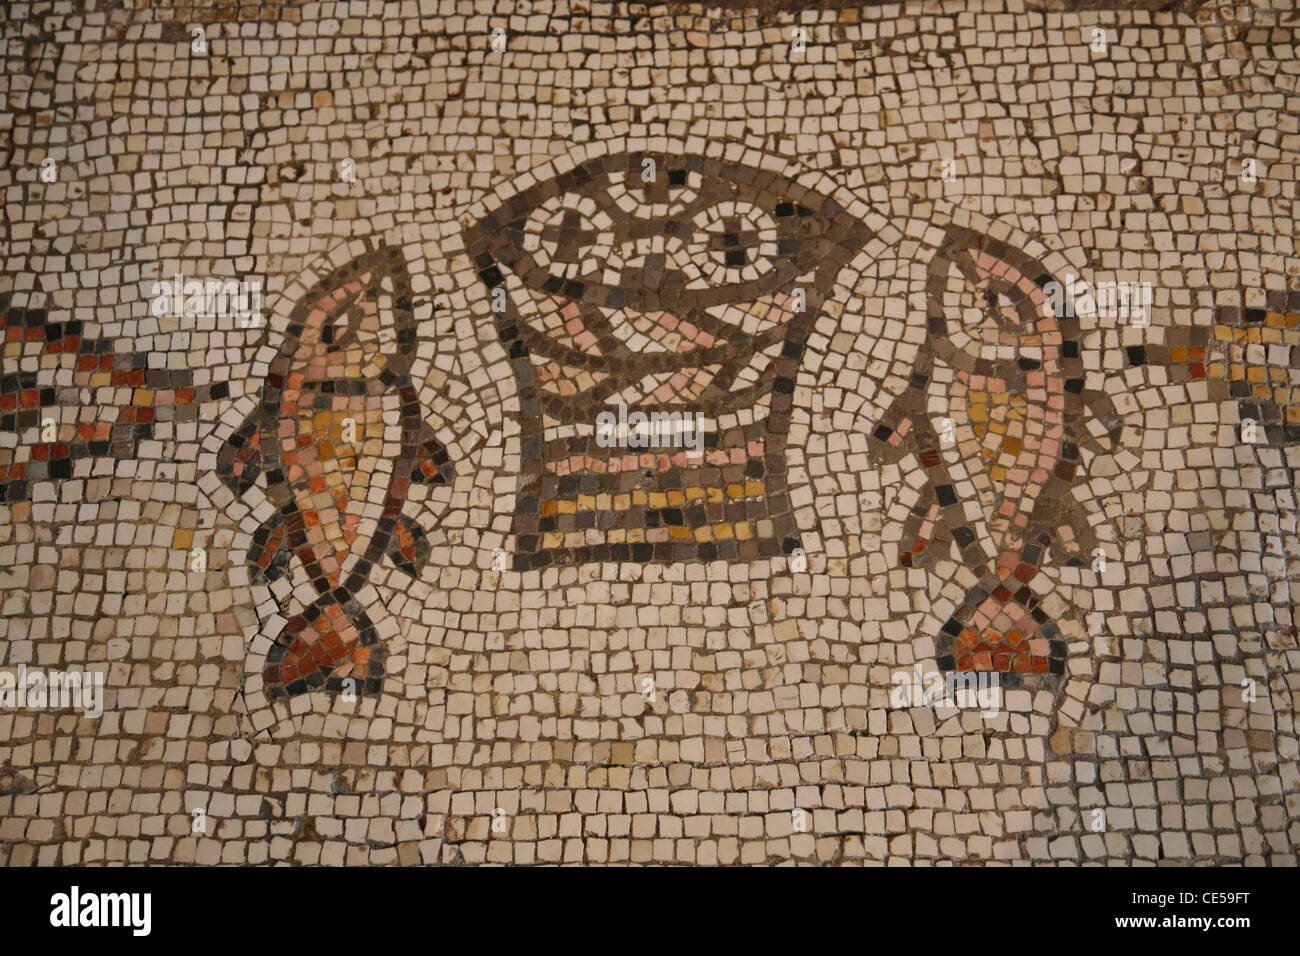 Mosaic, The Church of the Multiplication of the Loaves and the Fishes, Tabgha, Israel Stock Photo